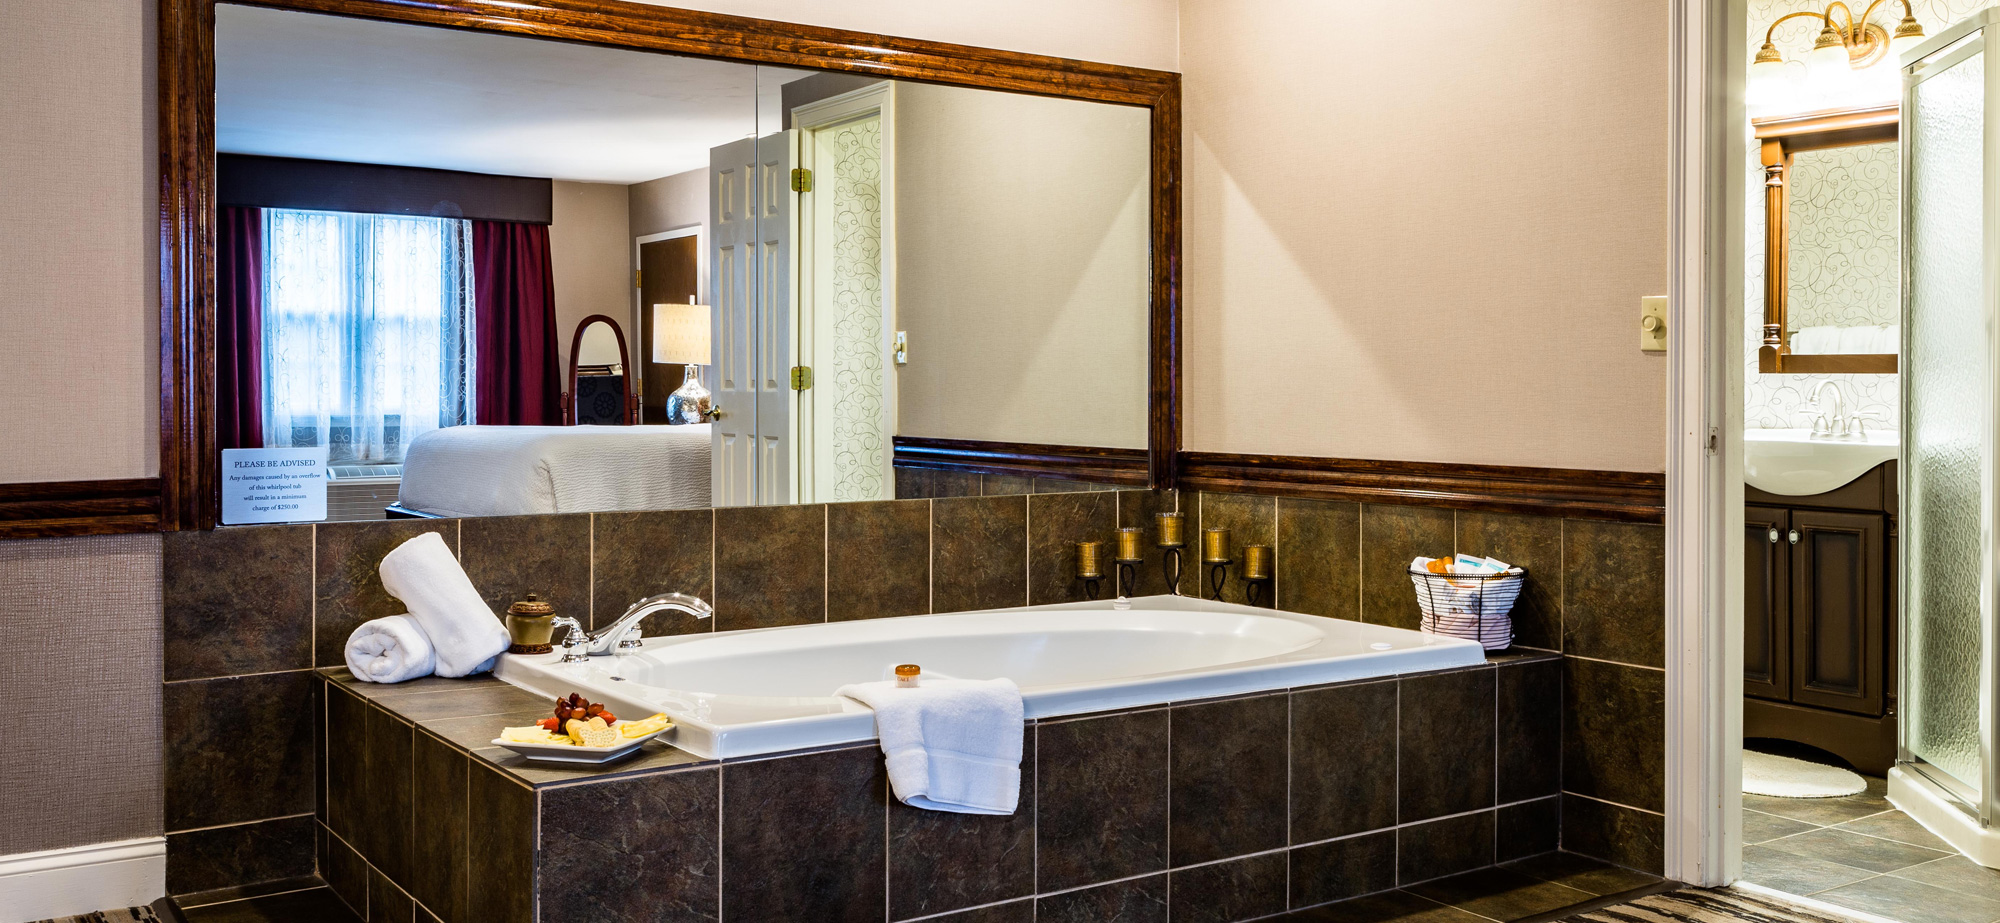 Jacuzzi Hotel Room Central Ma Getaway, Hotels In Boston With Big Bathtubs